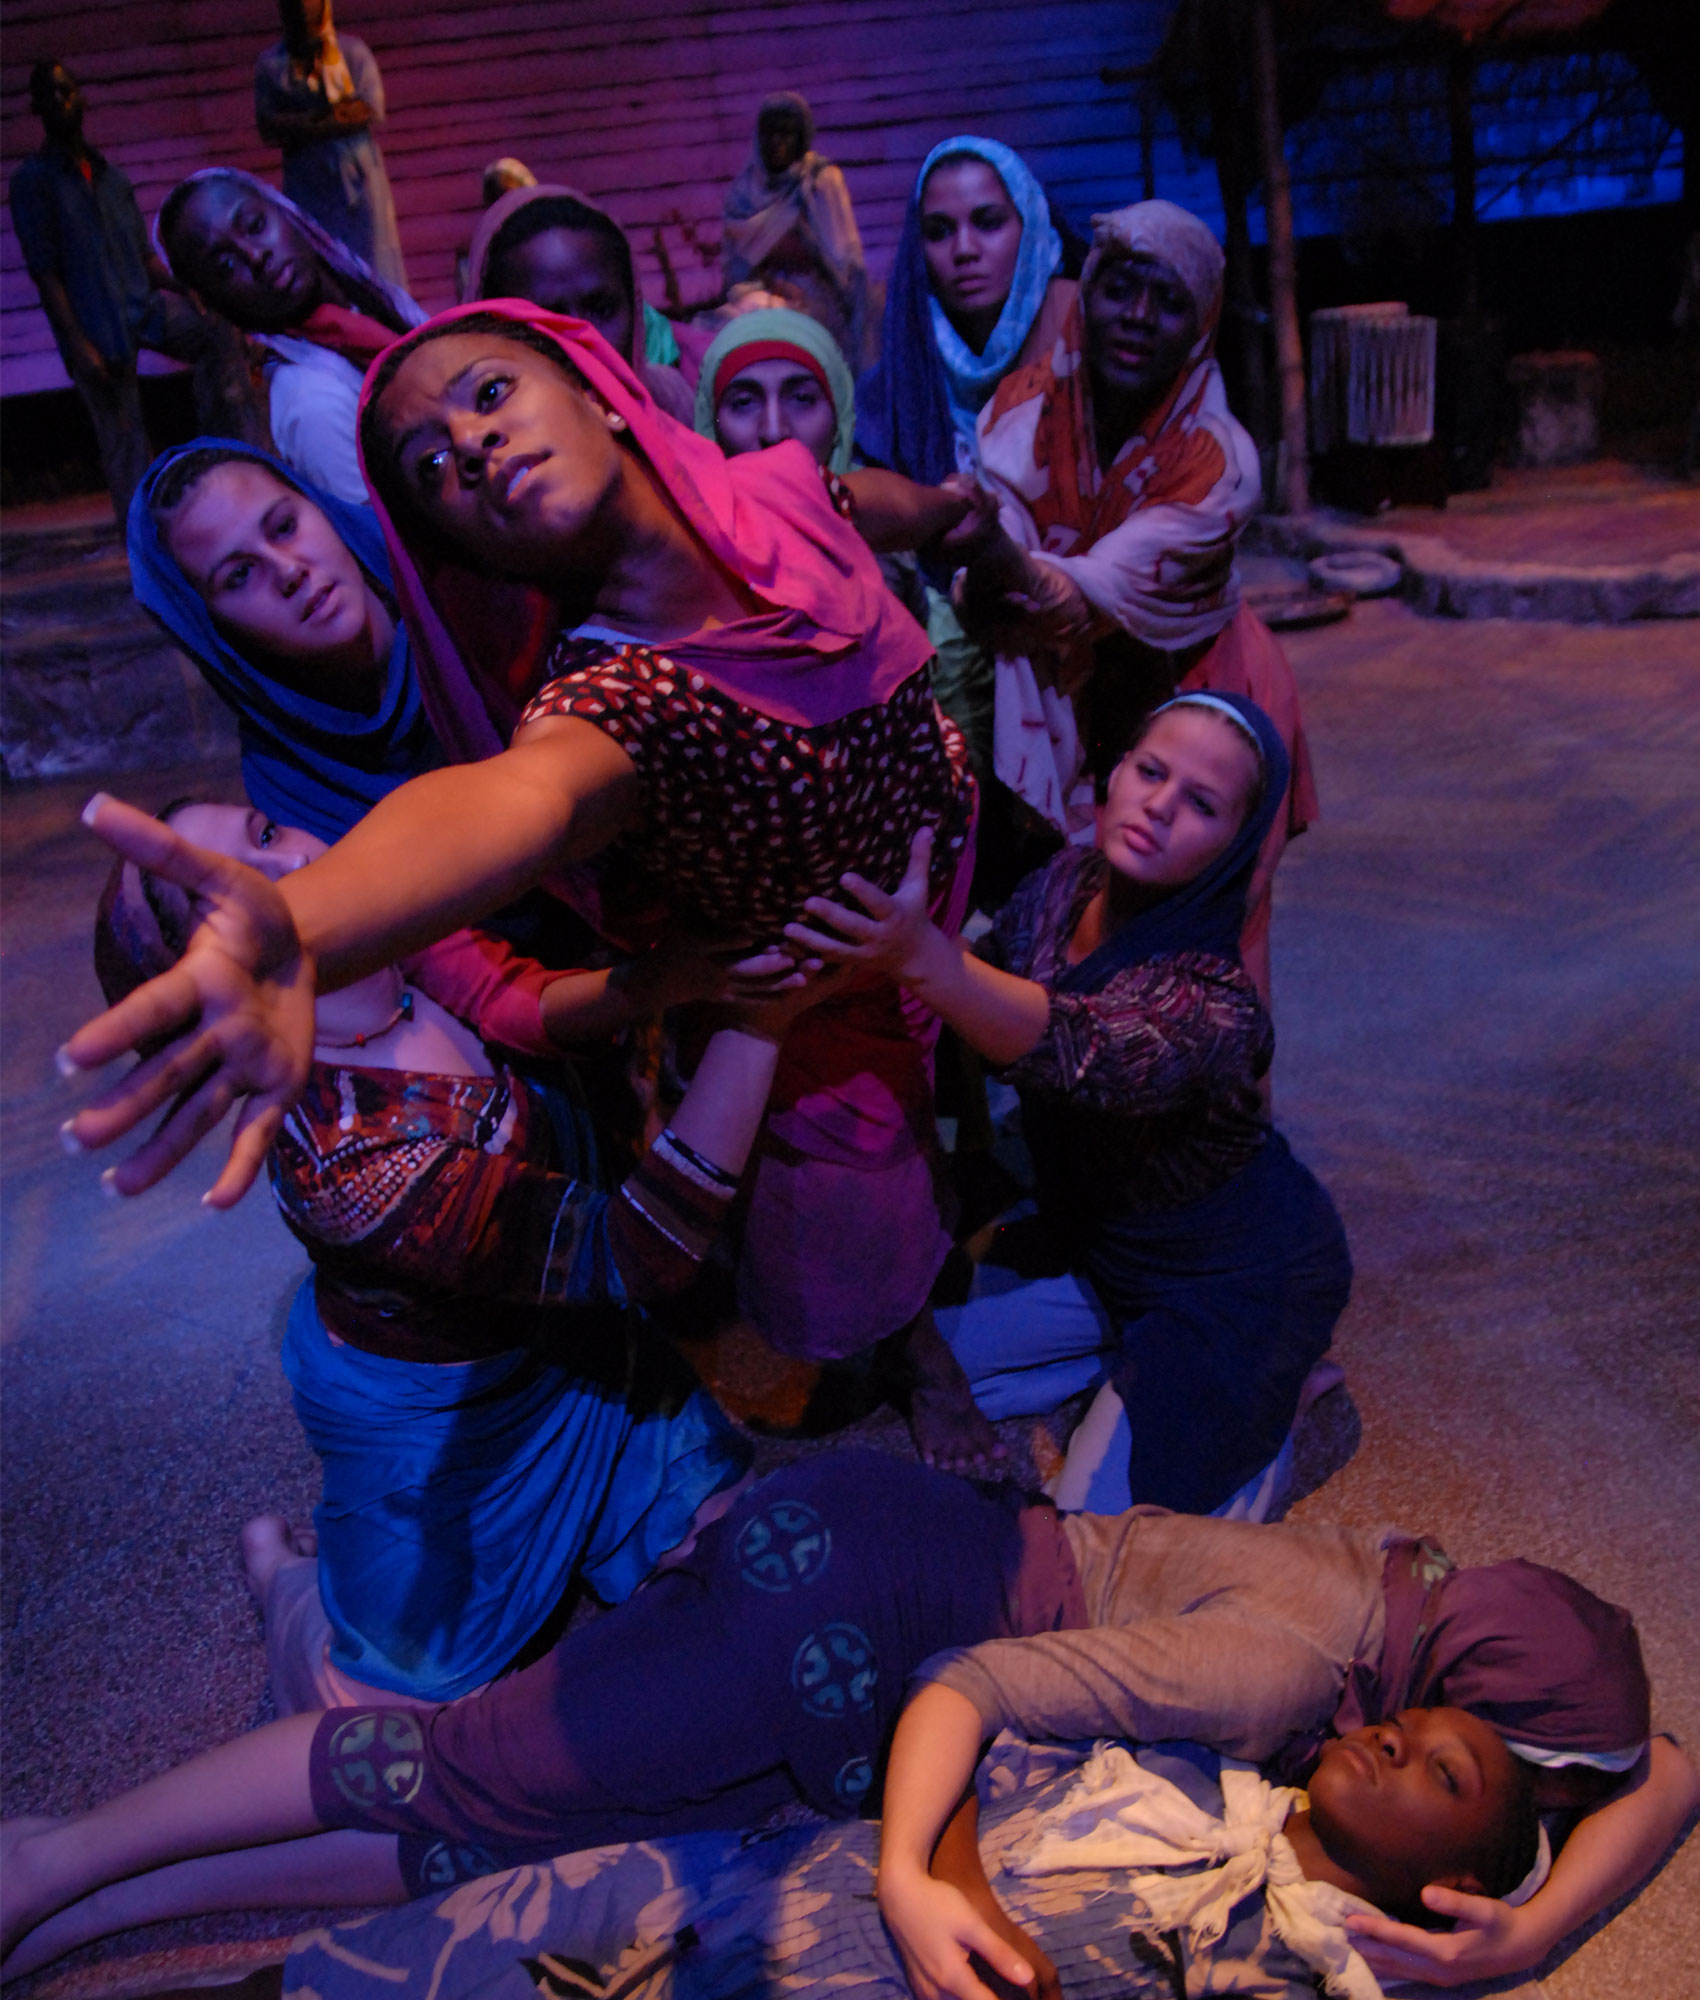 A child lies on the floor, embraced by someone, while a group of people surround another woman